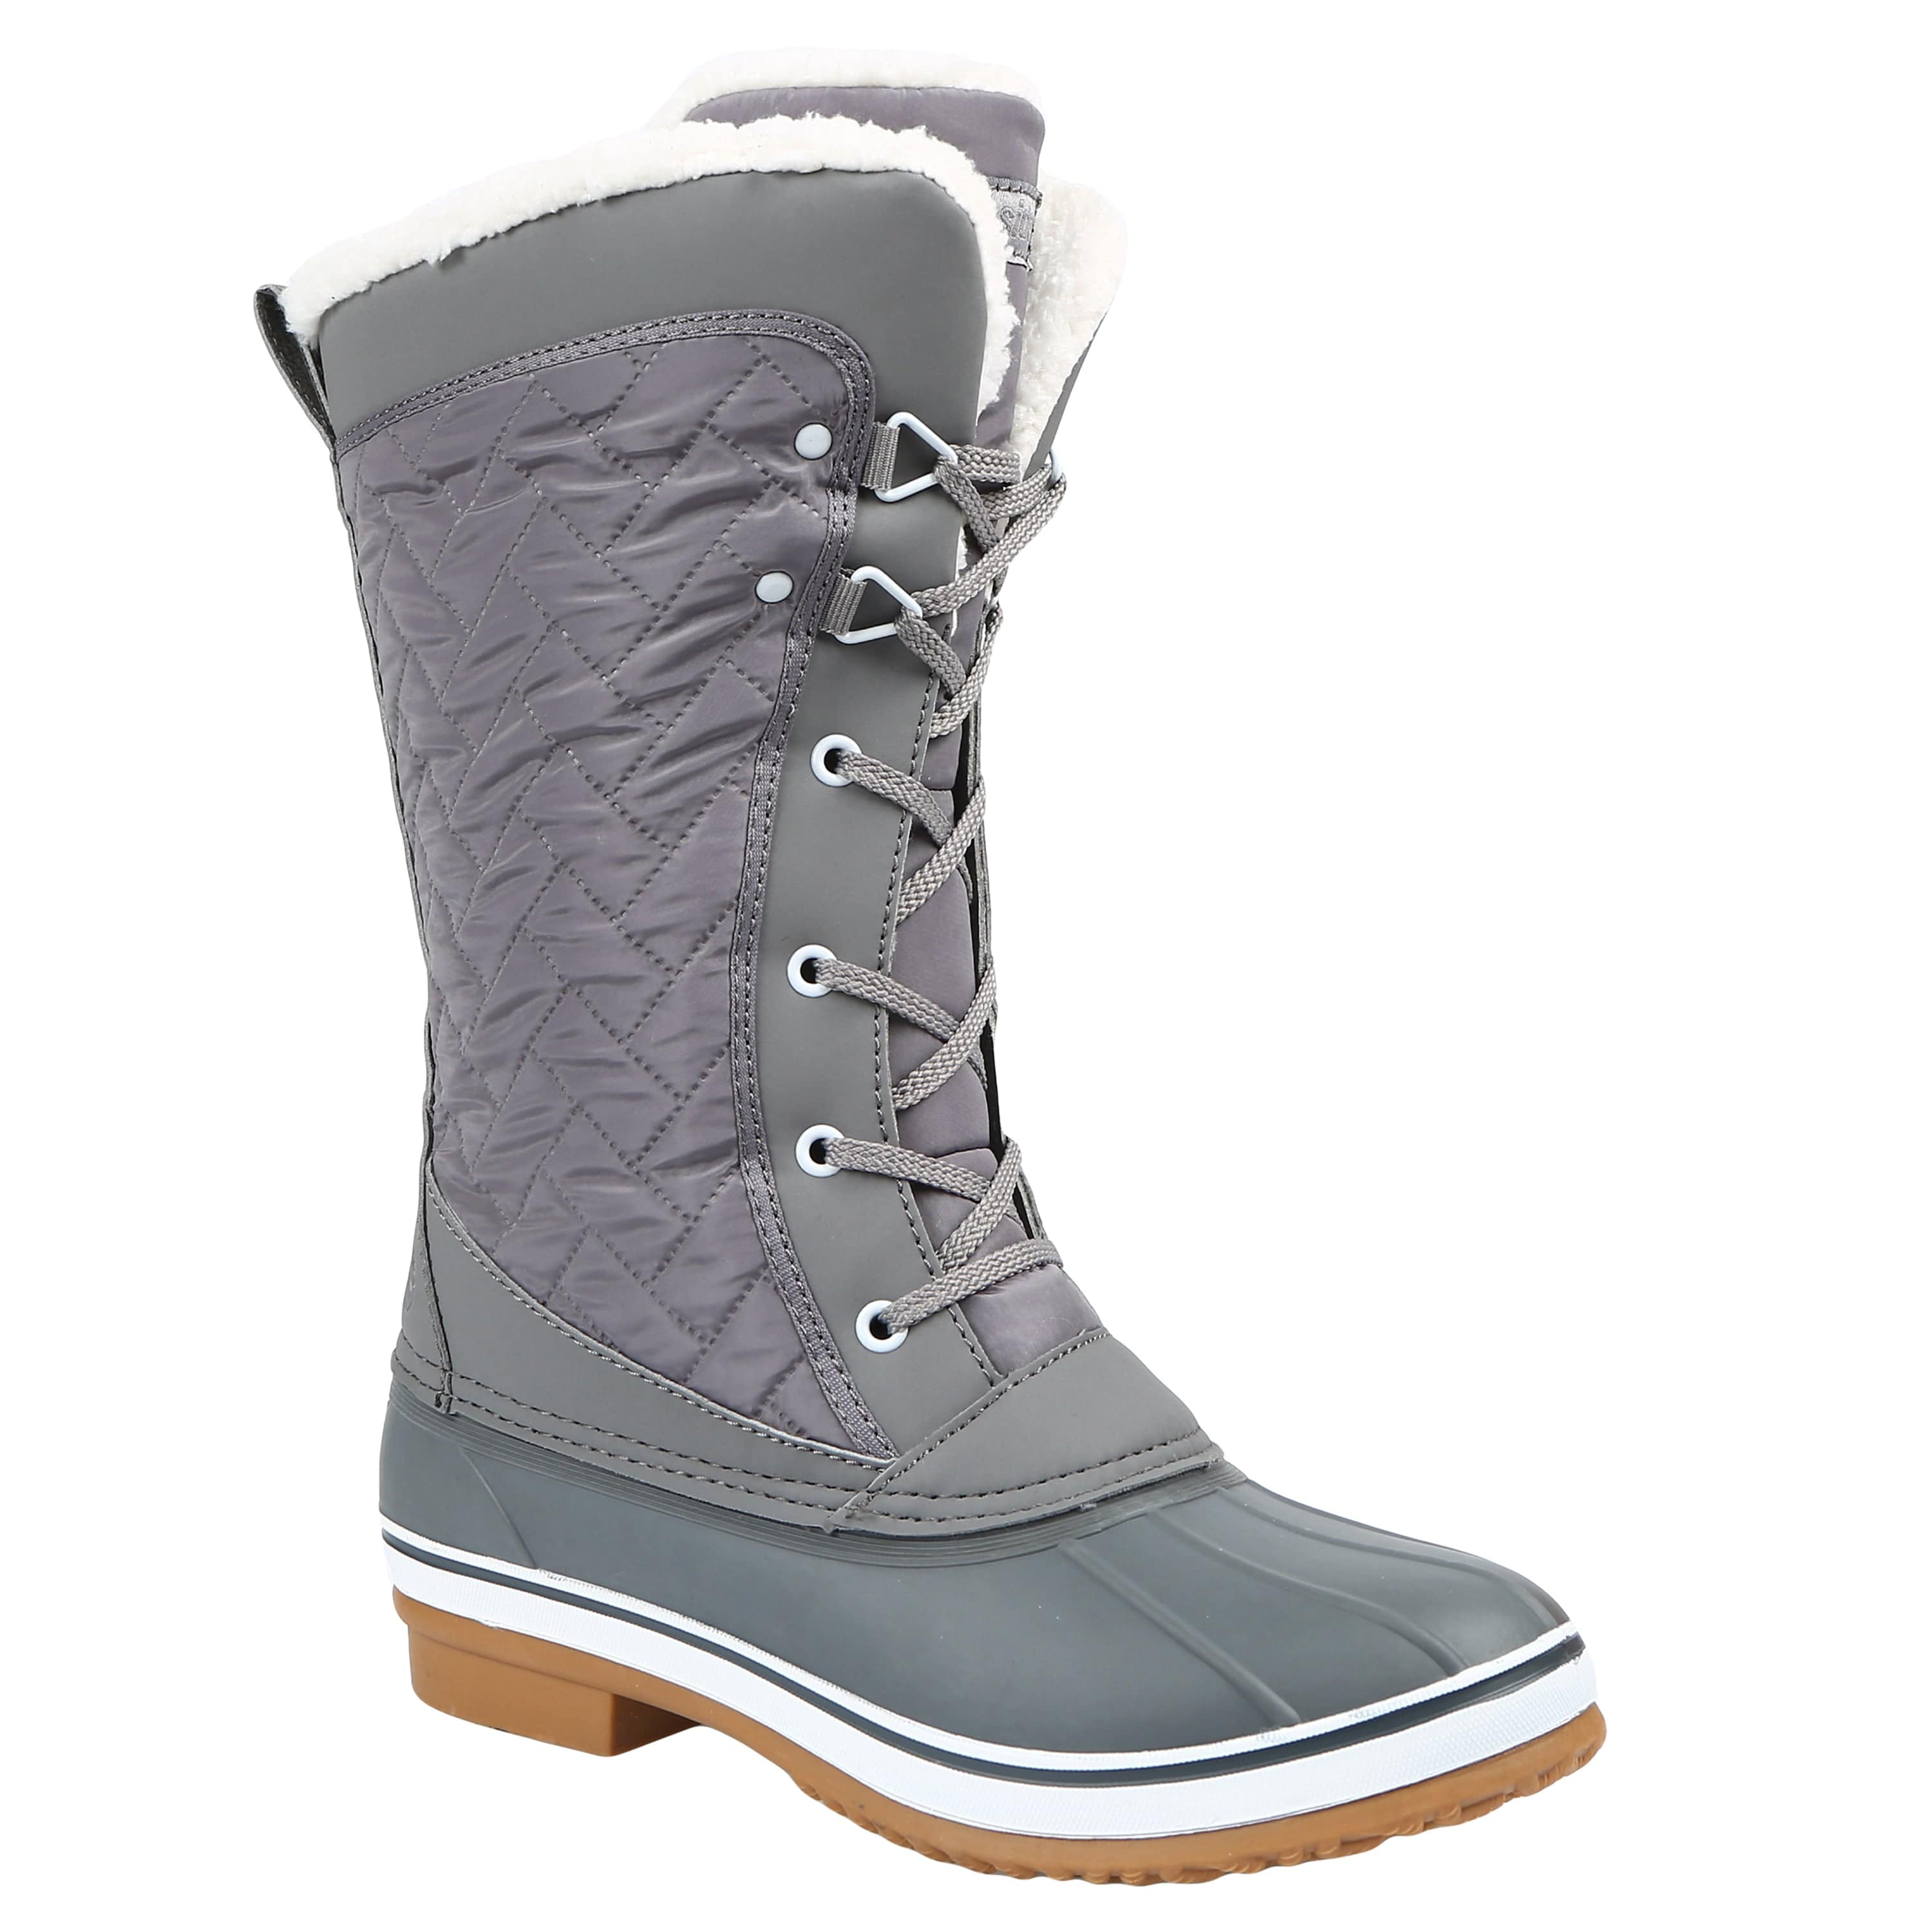 Quealent Womens Snow Boots, Warm Fur Lined Waterproof